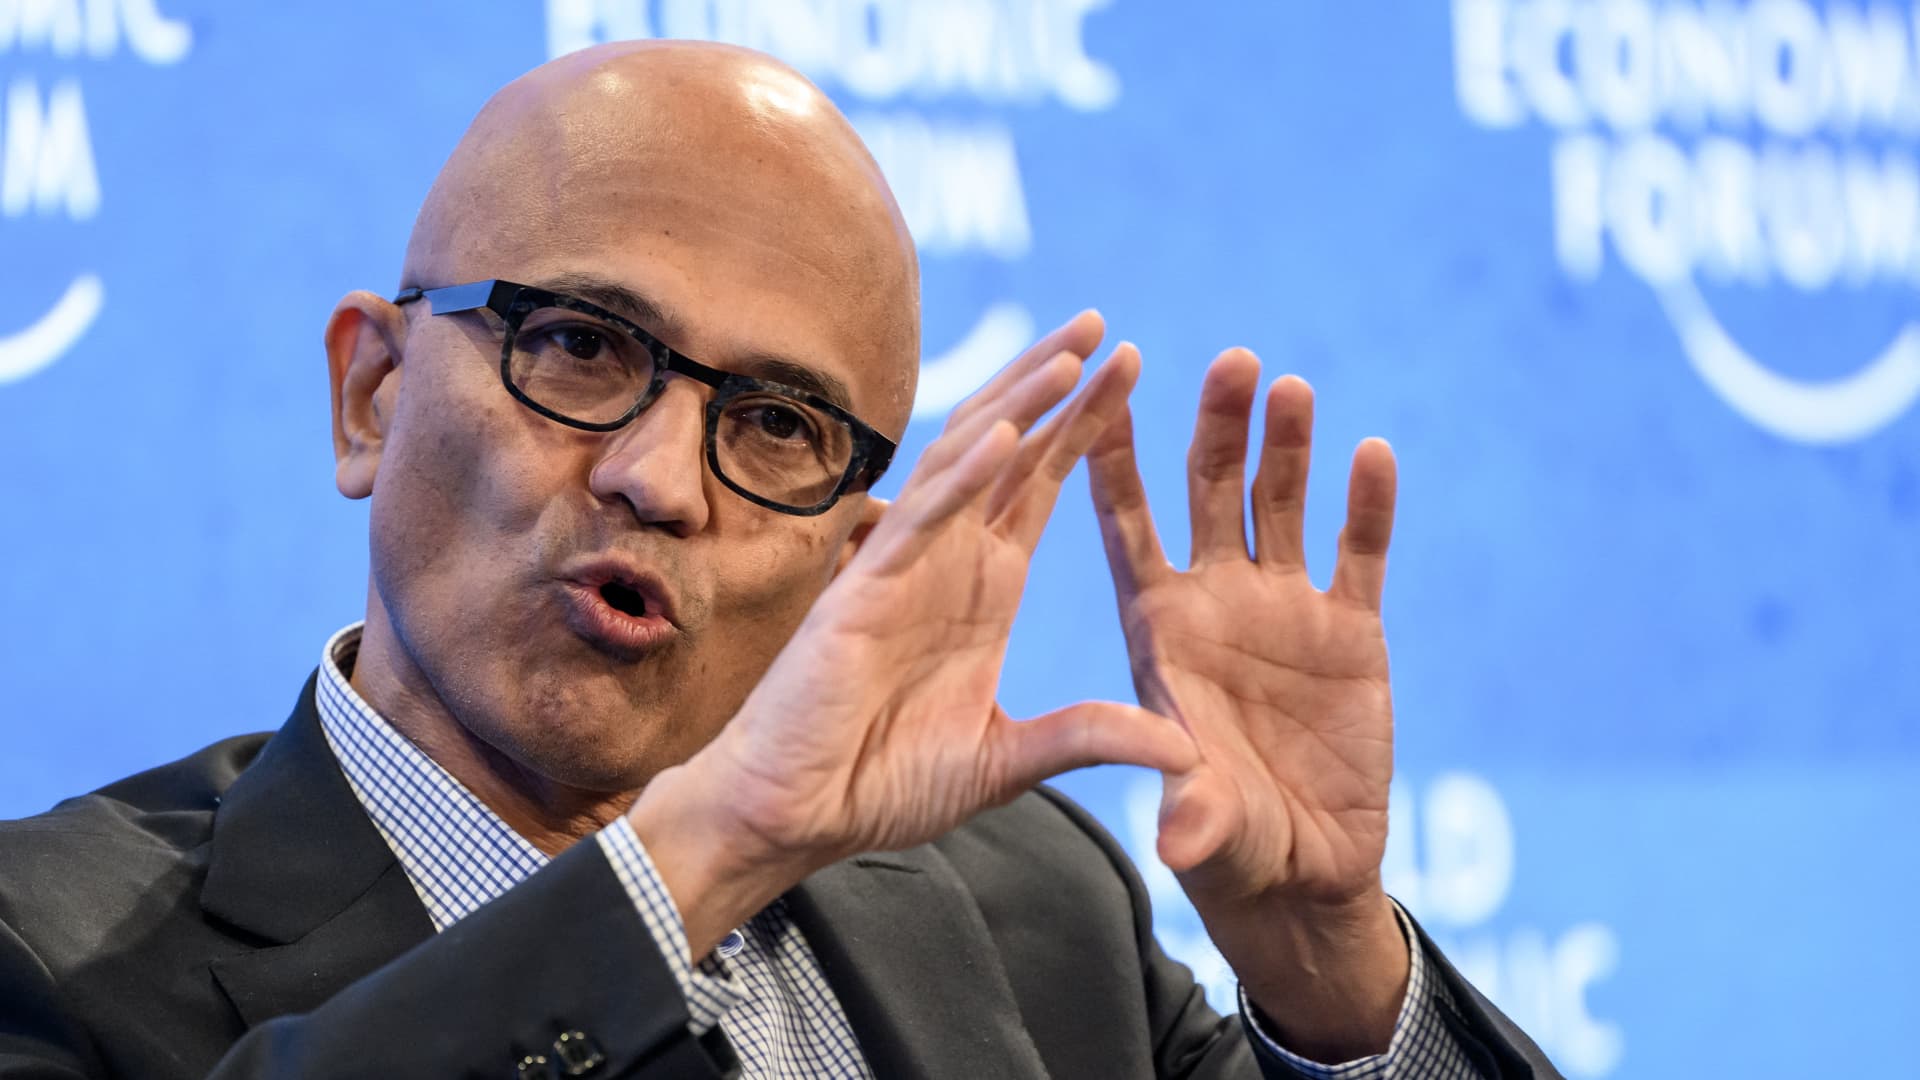 Microsoft drops 6% after revealing weak guidance on its earnings call